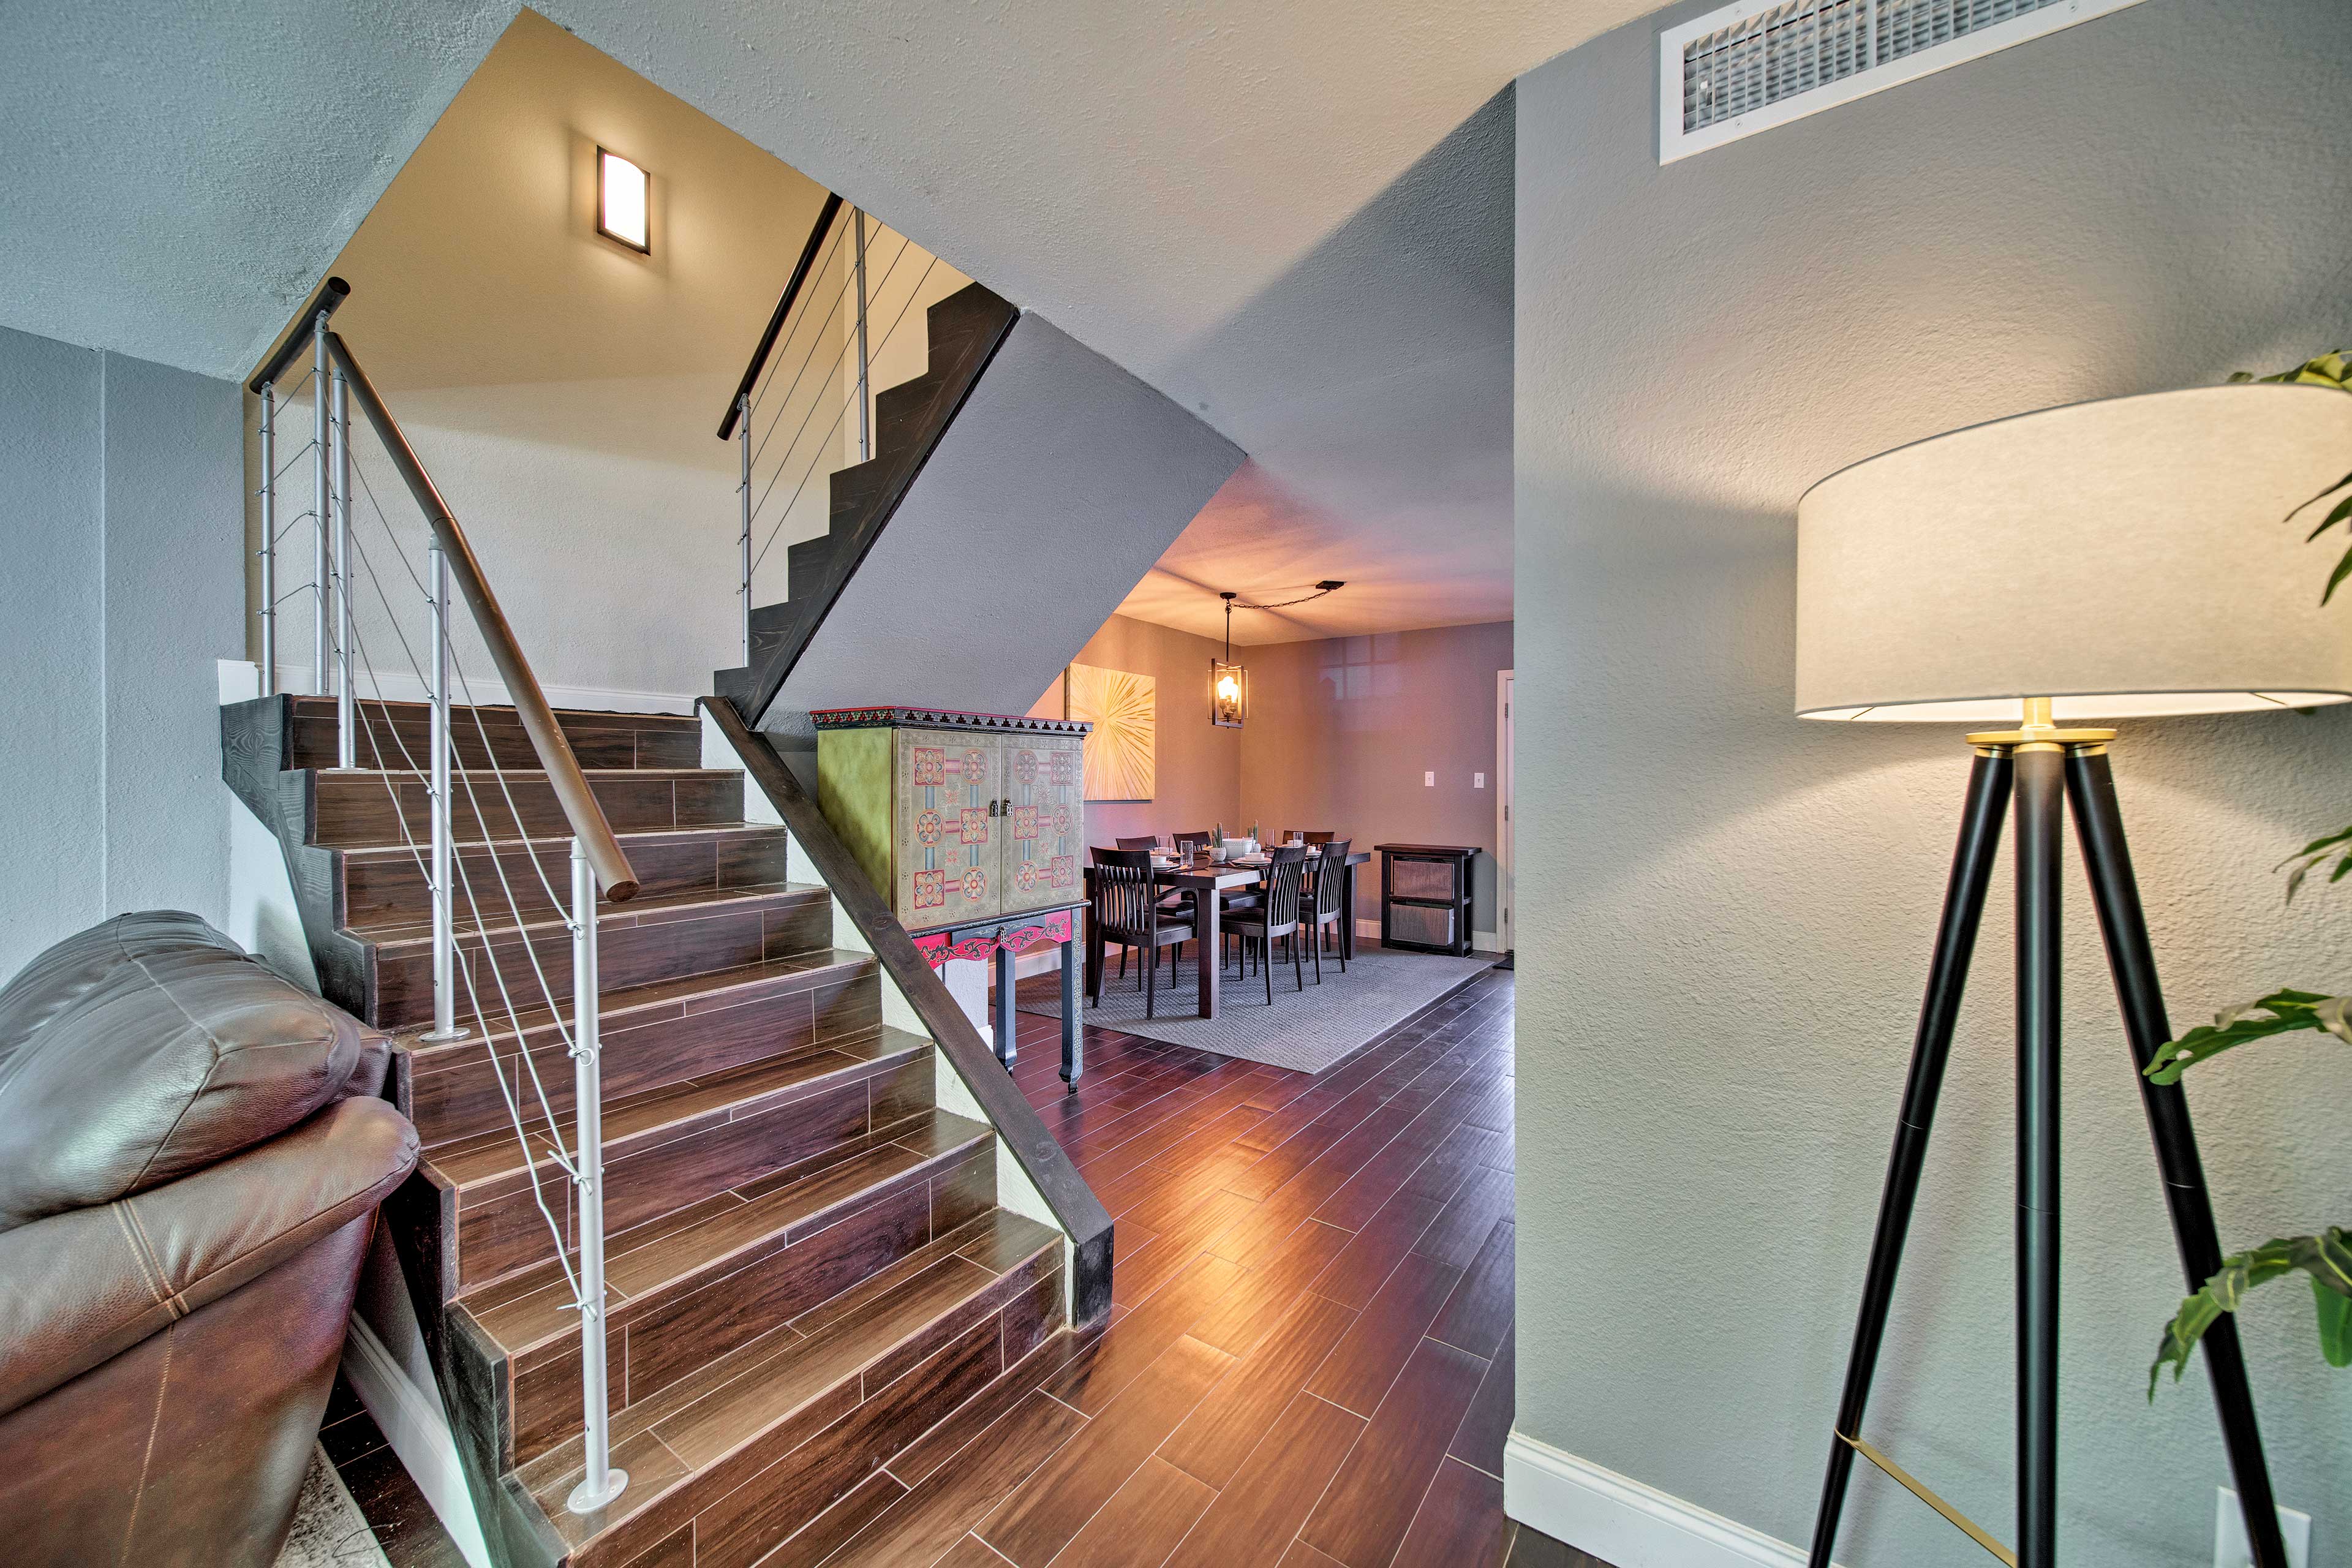 From the flooring to the staircase, you'll love every aspect of this townhome.